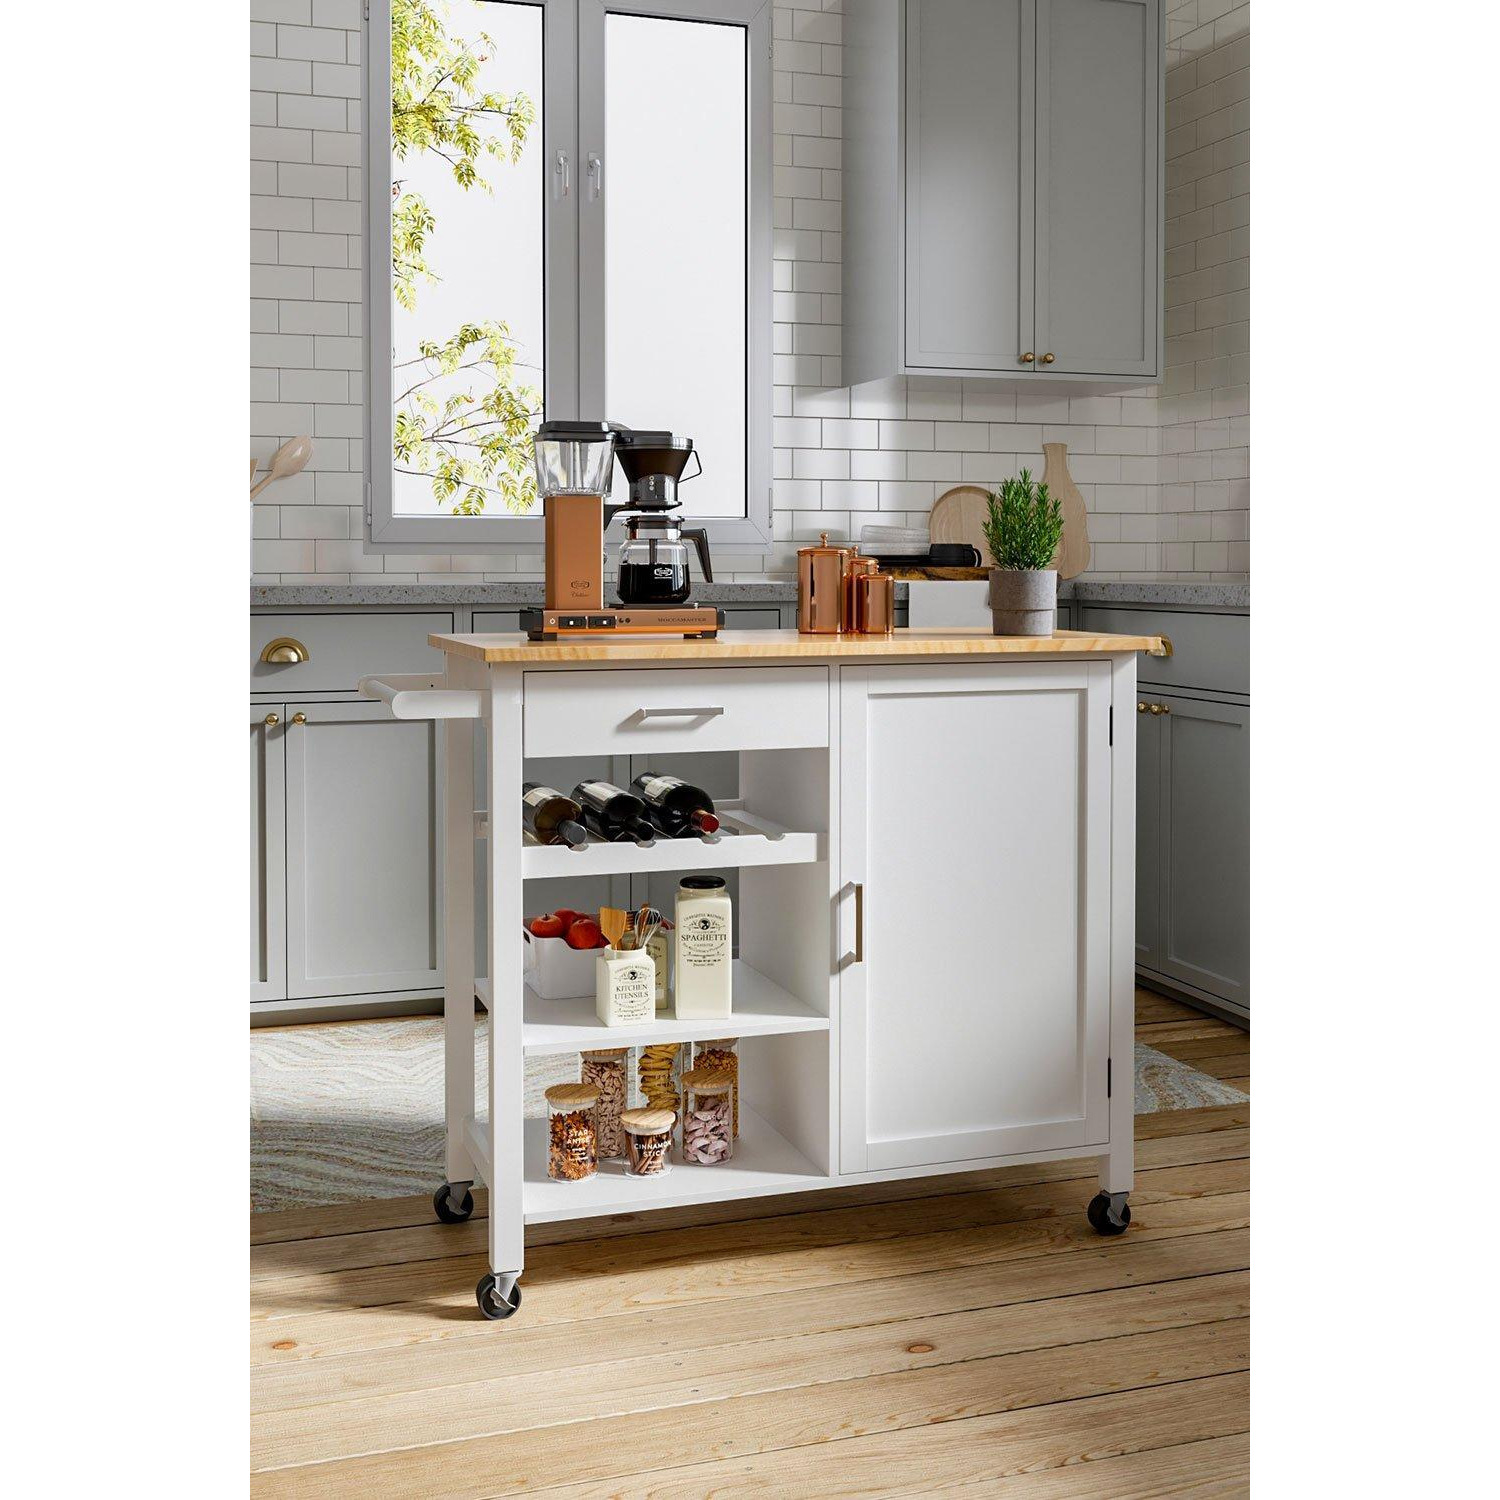 Kitchen Island Trolley with Drawer , Cabinet & 3-Tier Shelves - image 1